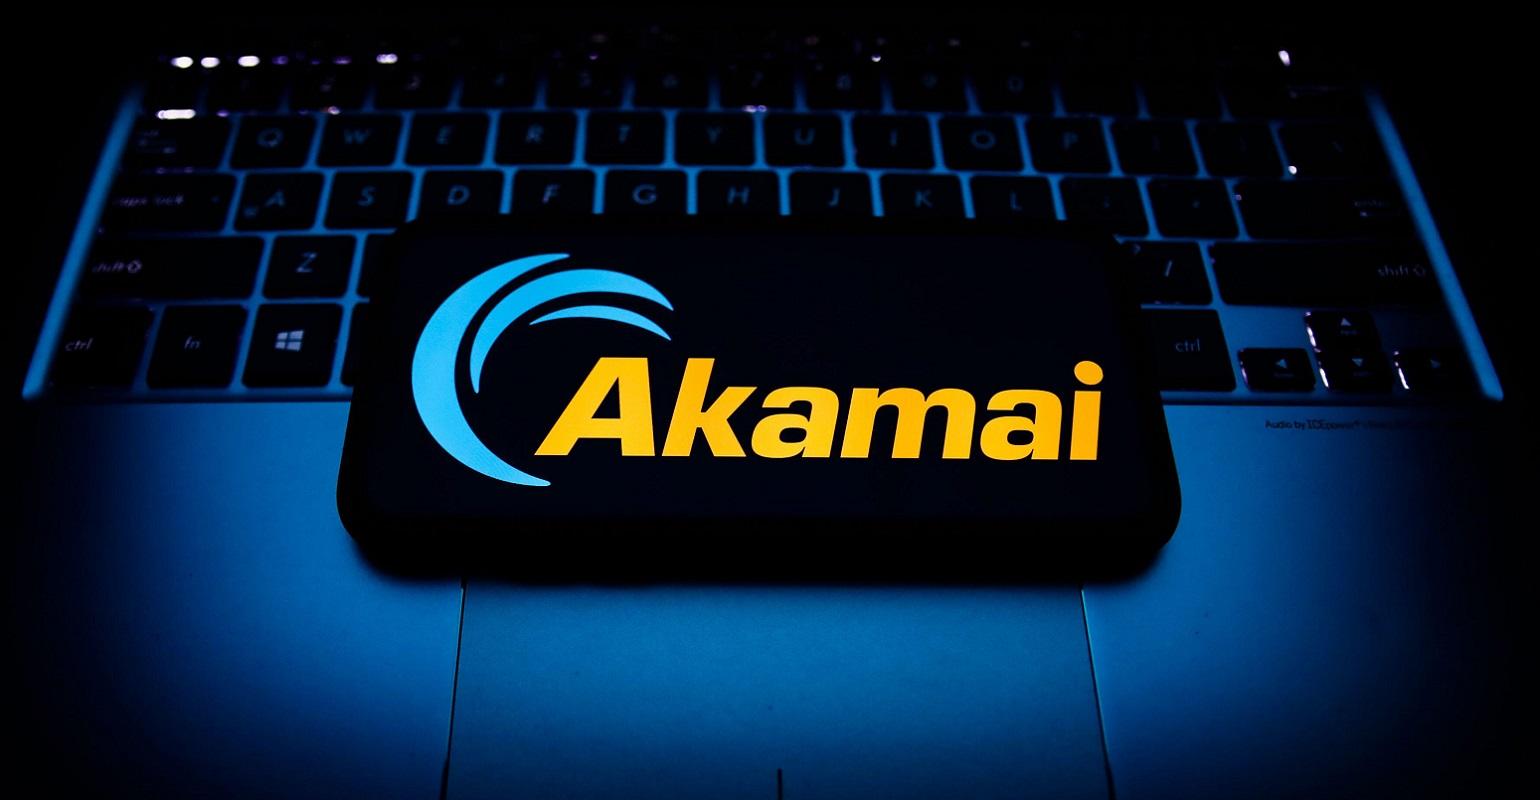 Akamai Expands Cloud Computing Presence With New Regions In Asia, Europe, And The Americas